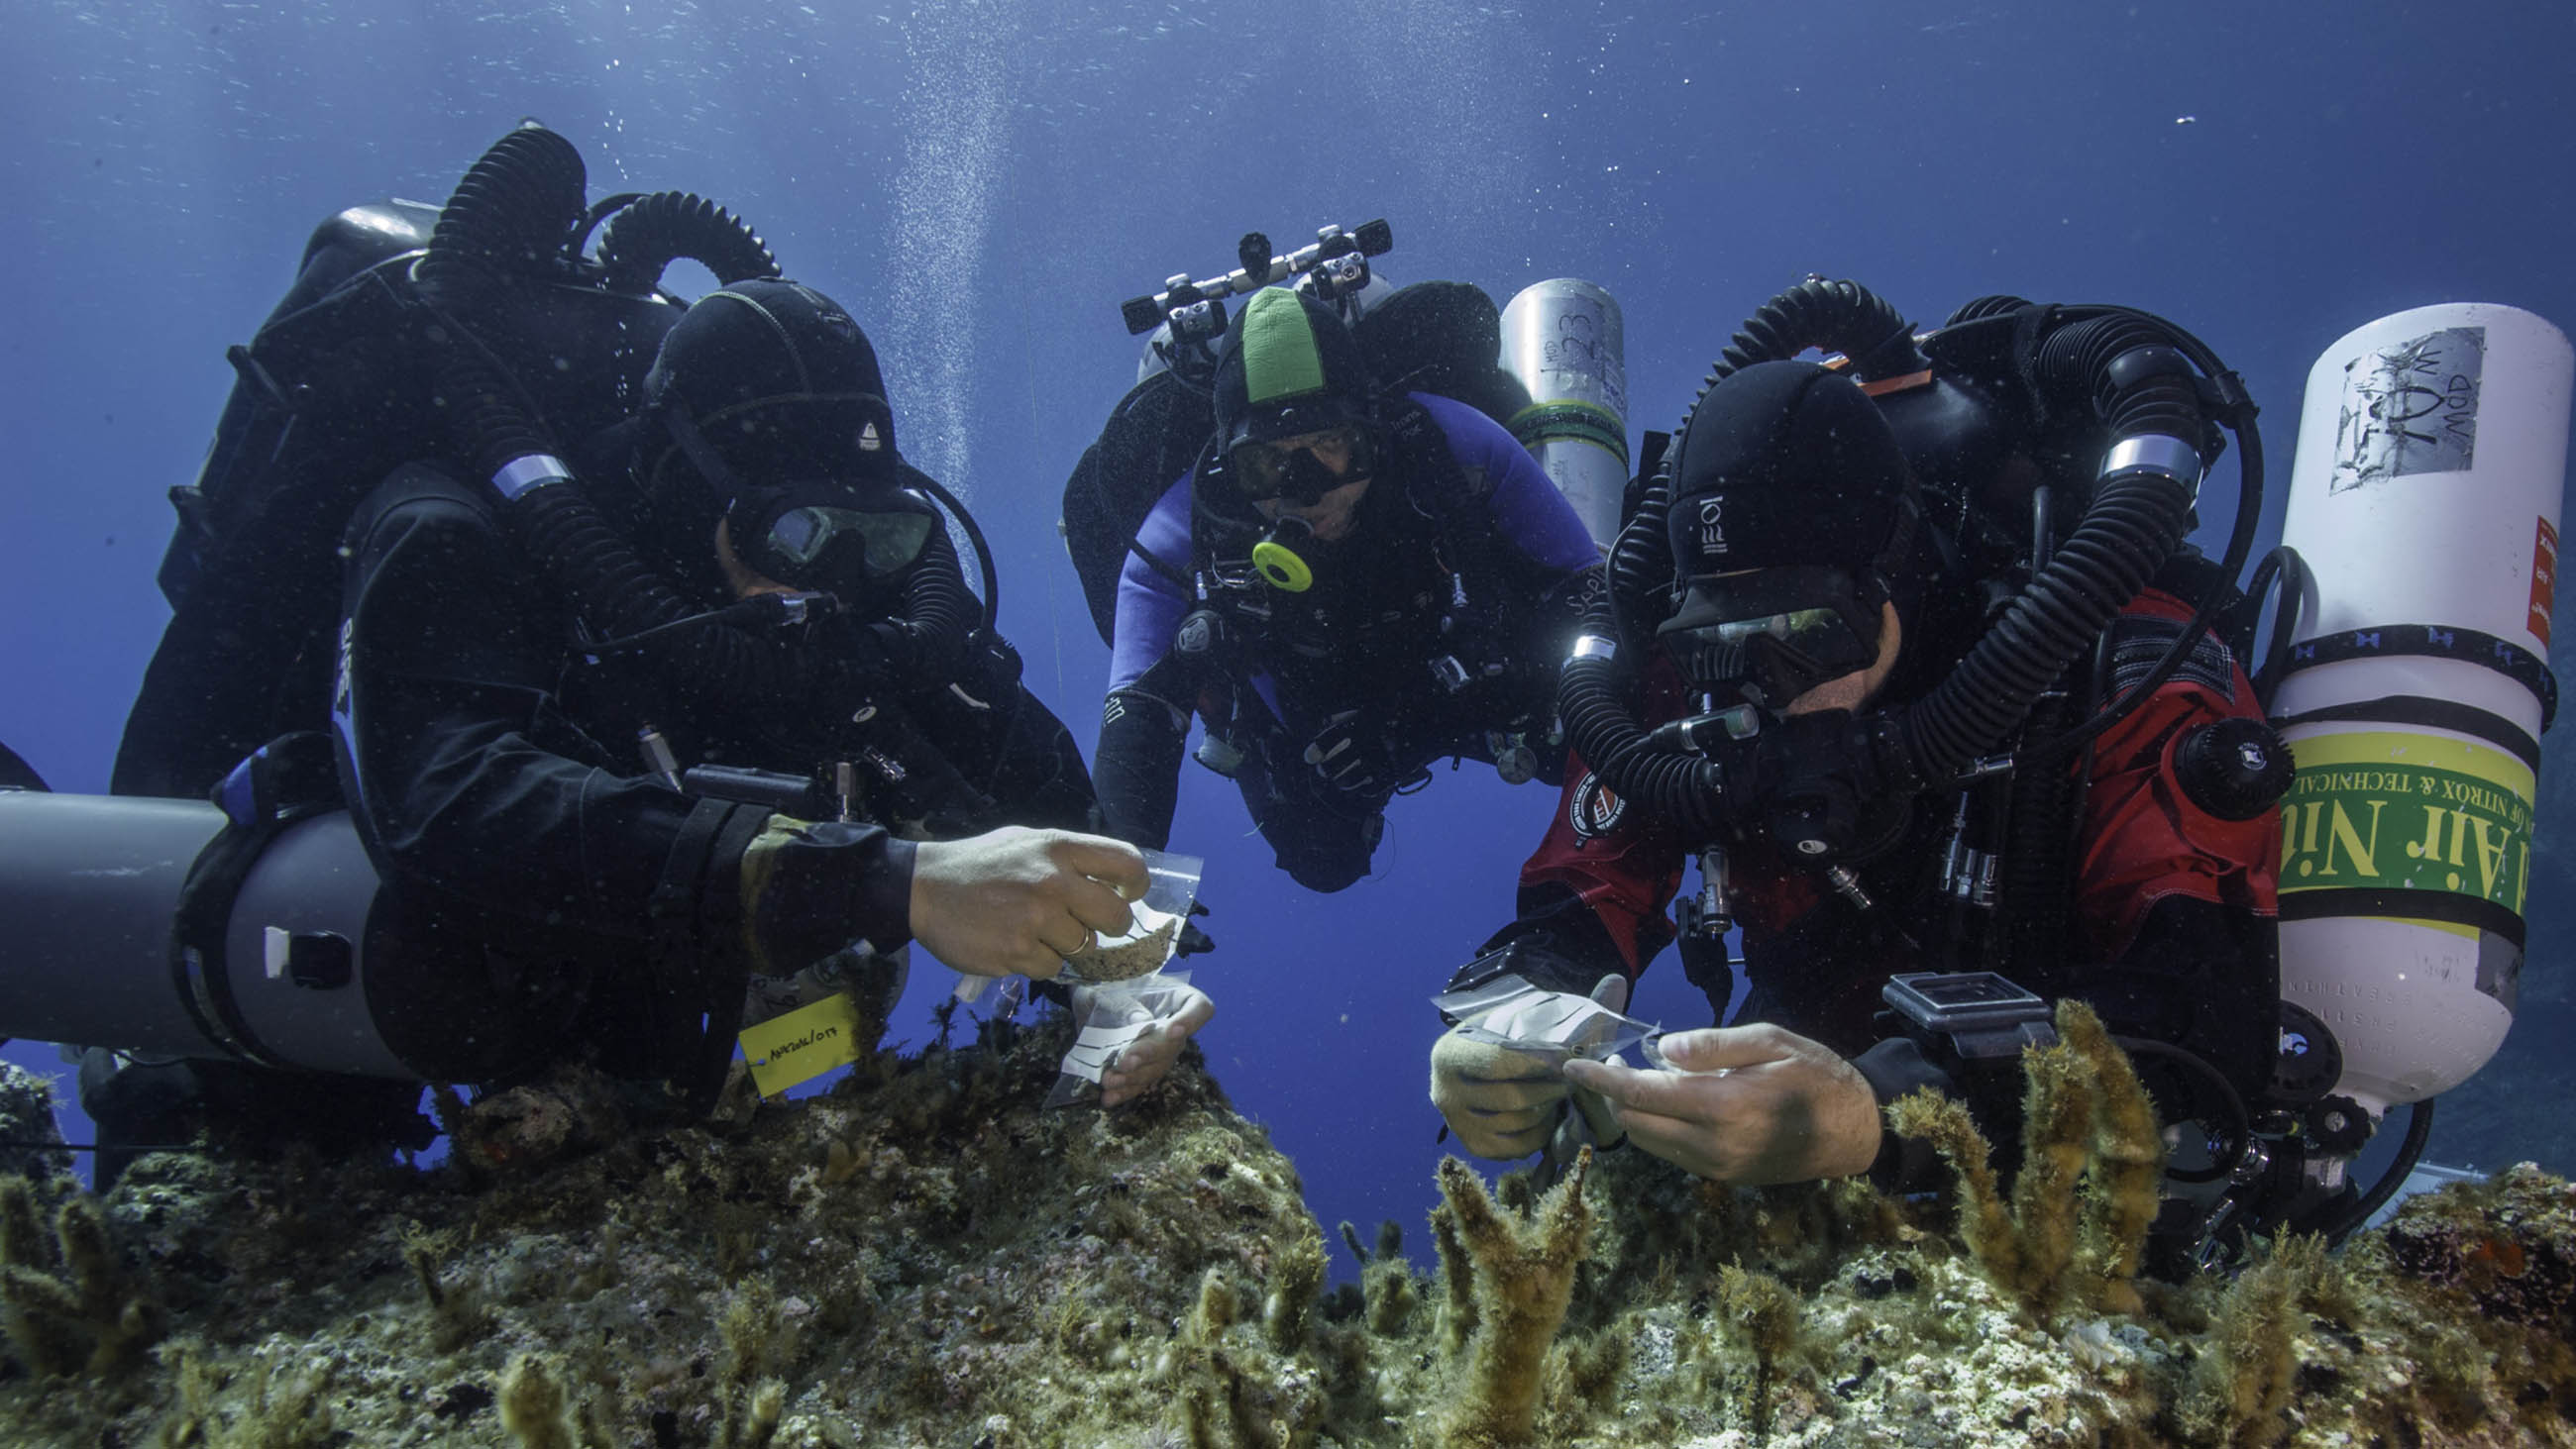 Maine archaeologists are finding new treasures from the ancient shipwreck near the wreck at Antikythera Island in Greece.